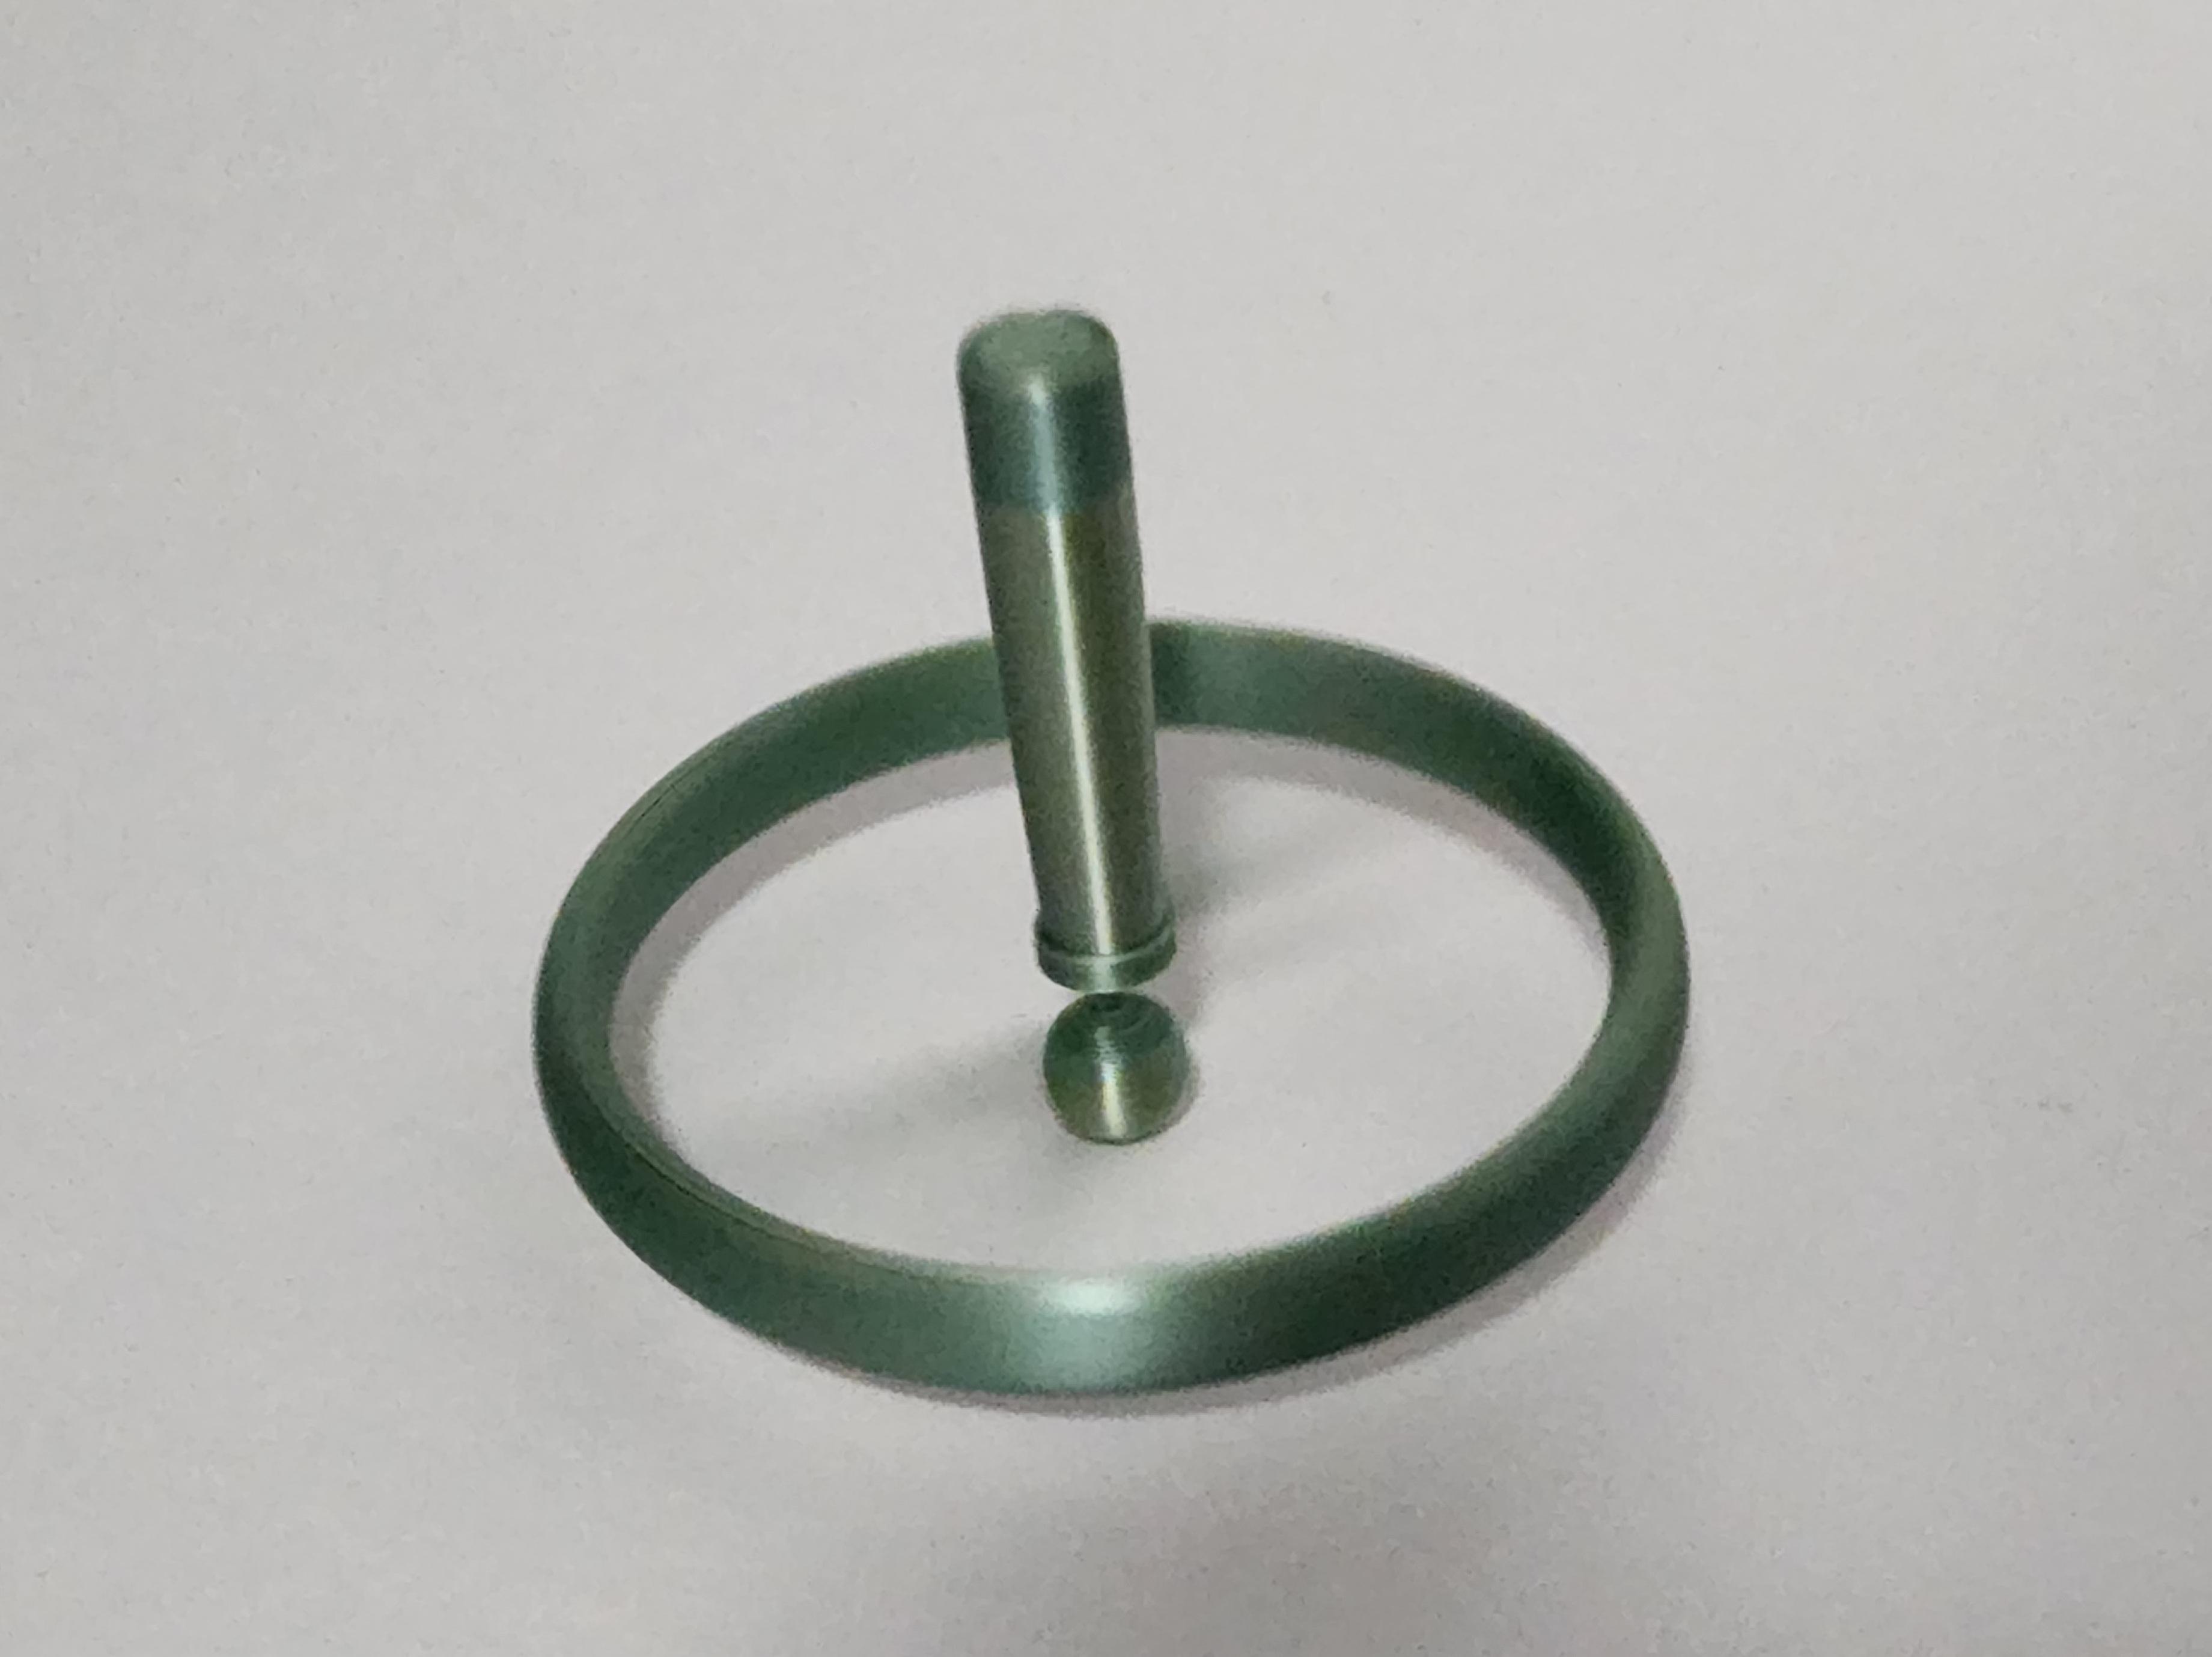 Impossible Spinner - Looks so cool mid-spin! Printed with Sunlu "bronze" green silk PLA using tree supports on the Bambu Lab P1P. Thanks for the great design, Ms. Bunny! - 3d model